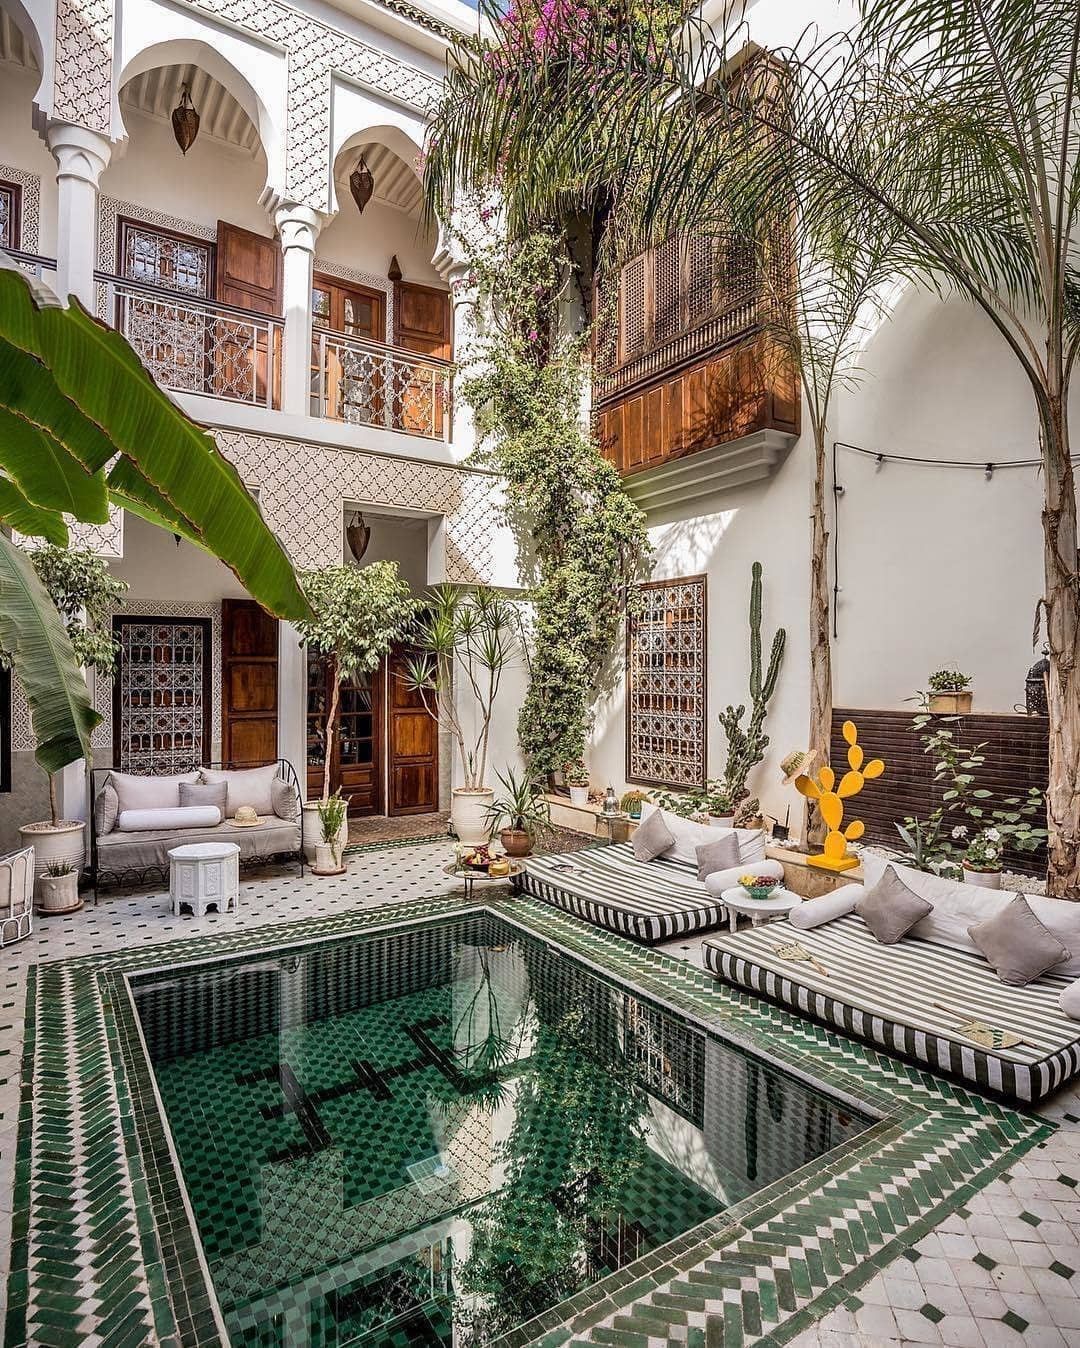 Moroccan style outdoor area with green mosaic tile pool and lounging pillows. Photo via instagram user @luxvtrealestate